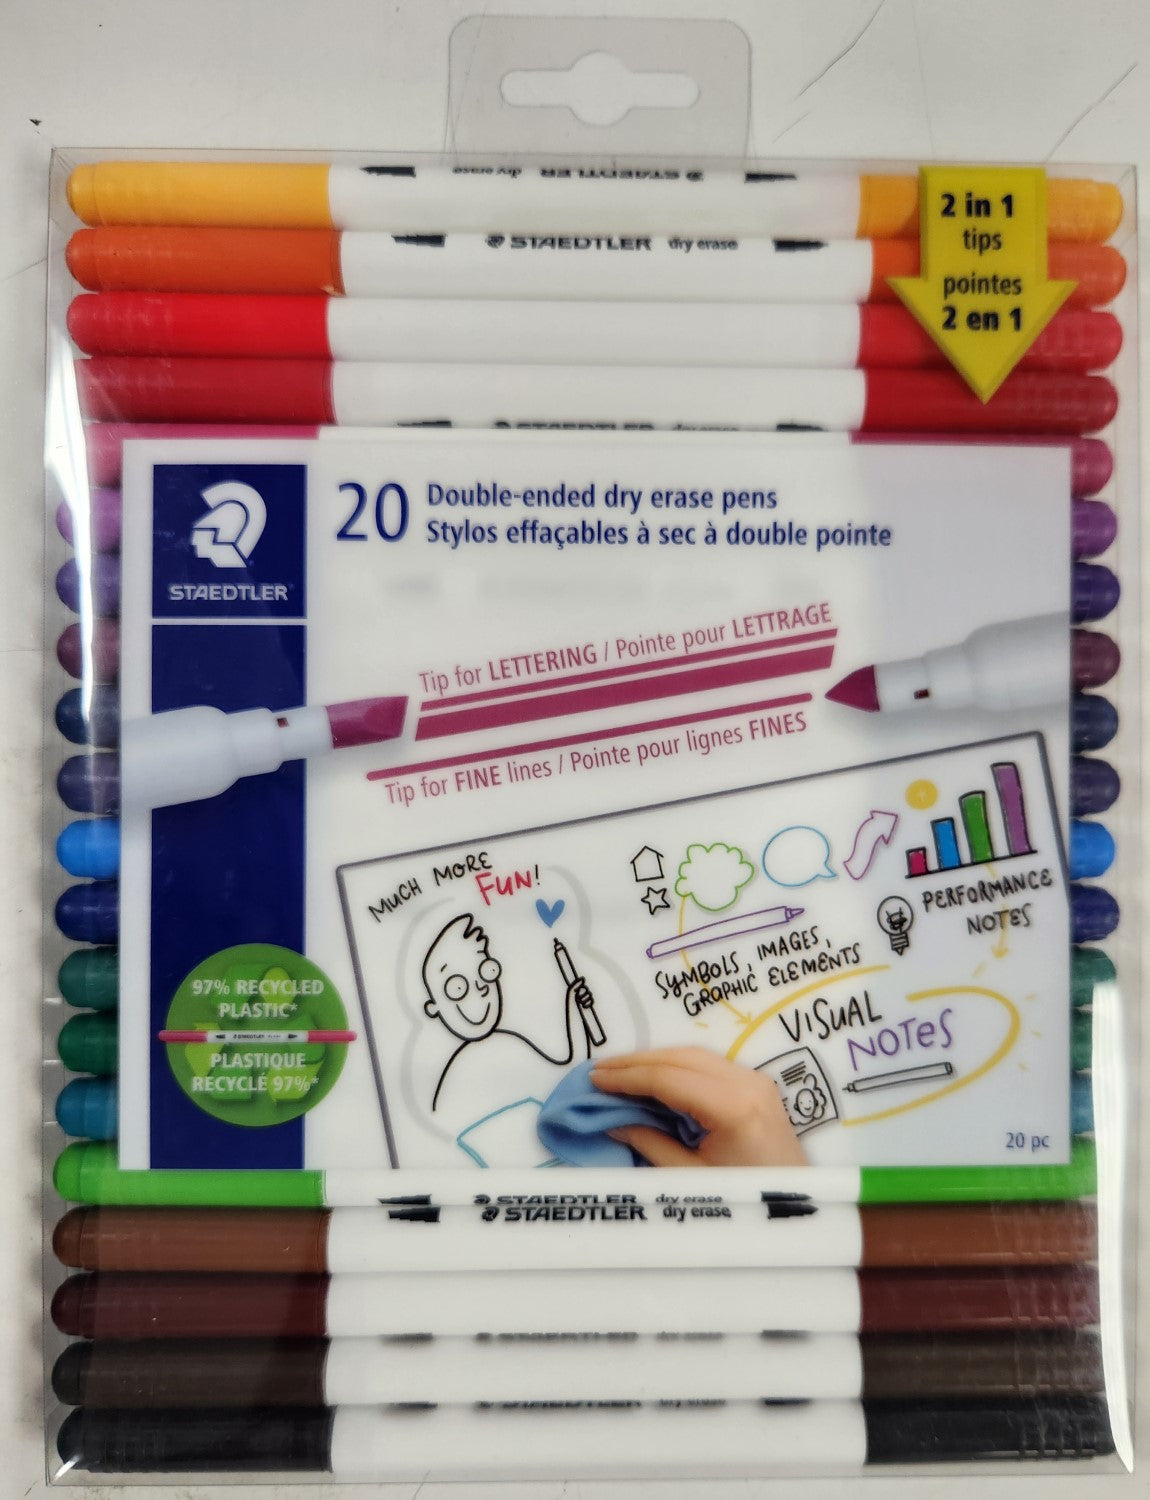 Staedtler 20pc Double-Ended Dry Erase Pen